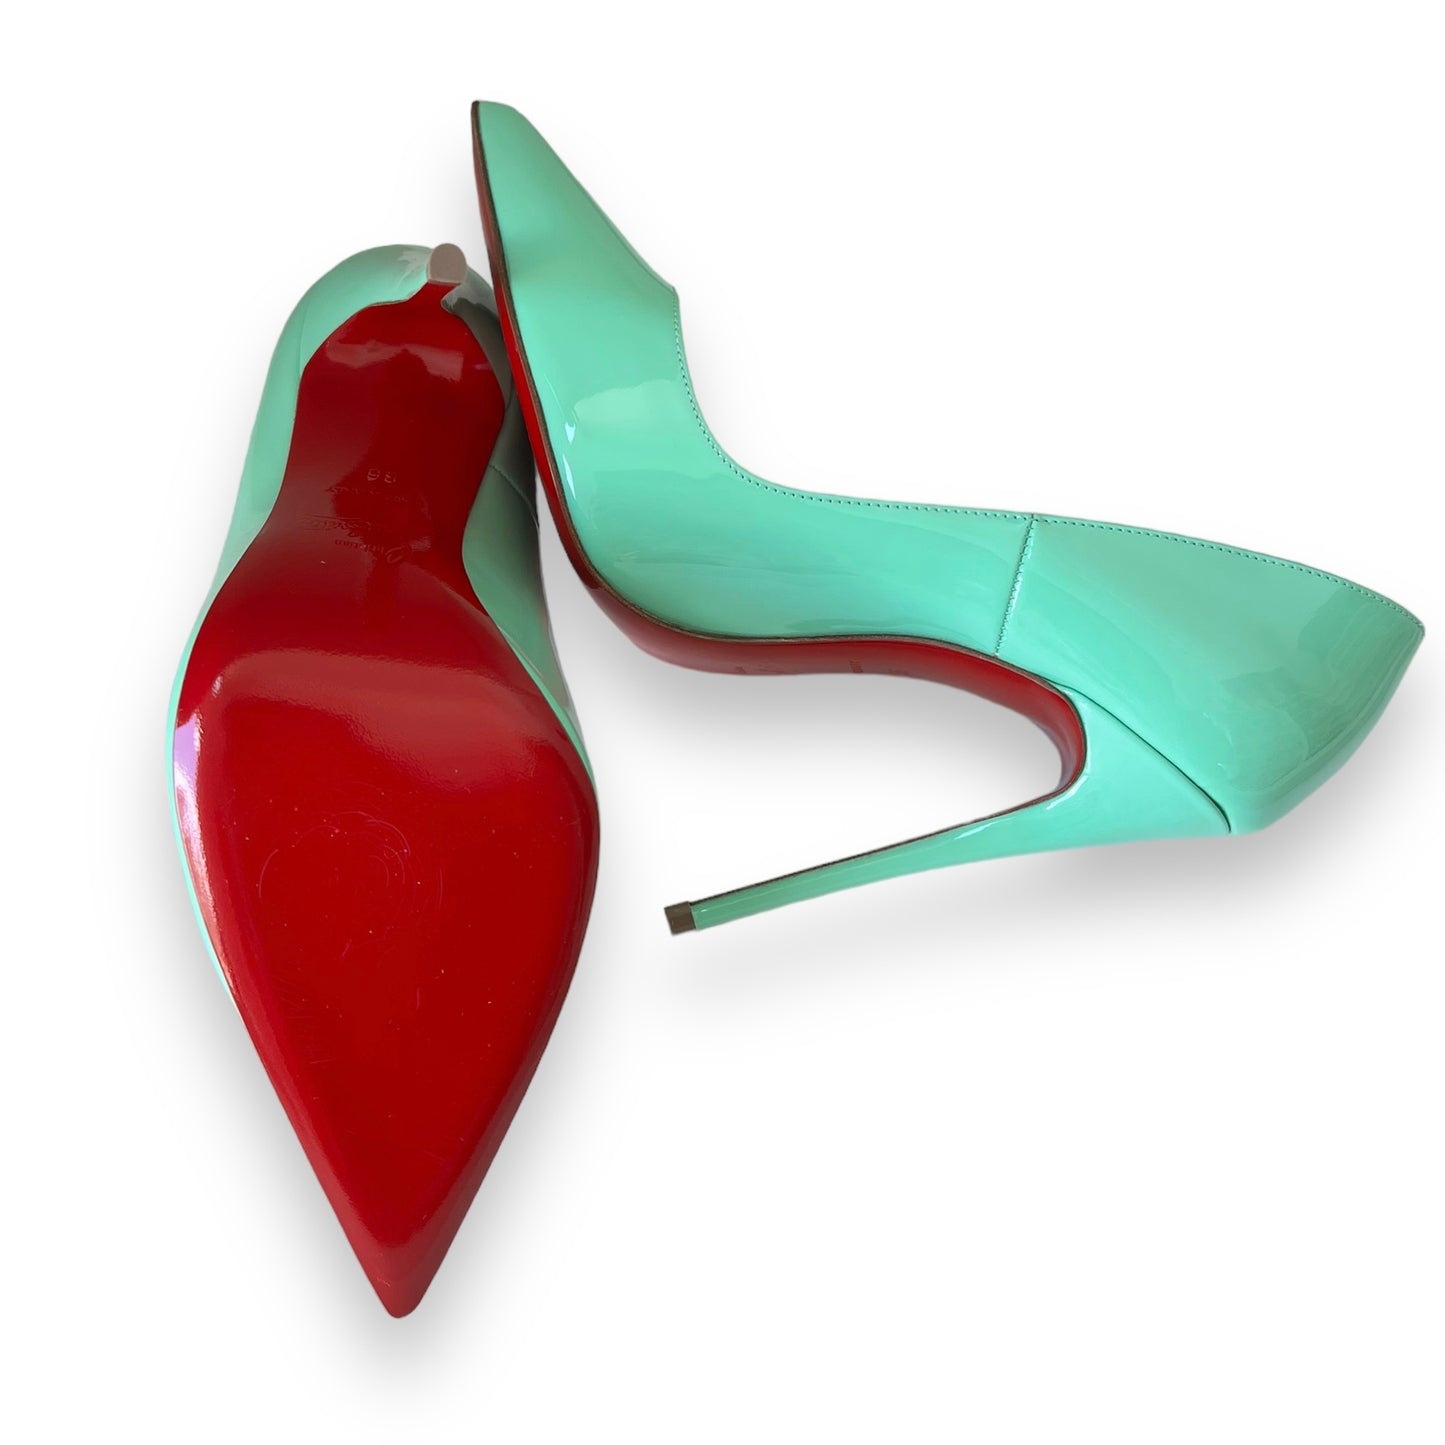 New! Christian Louboutin So Kate 120mm Patent Leather Pumps